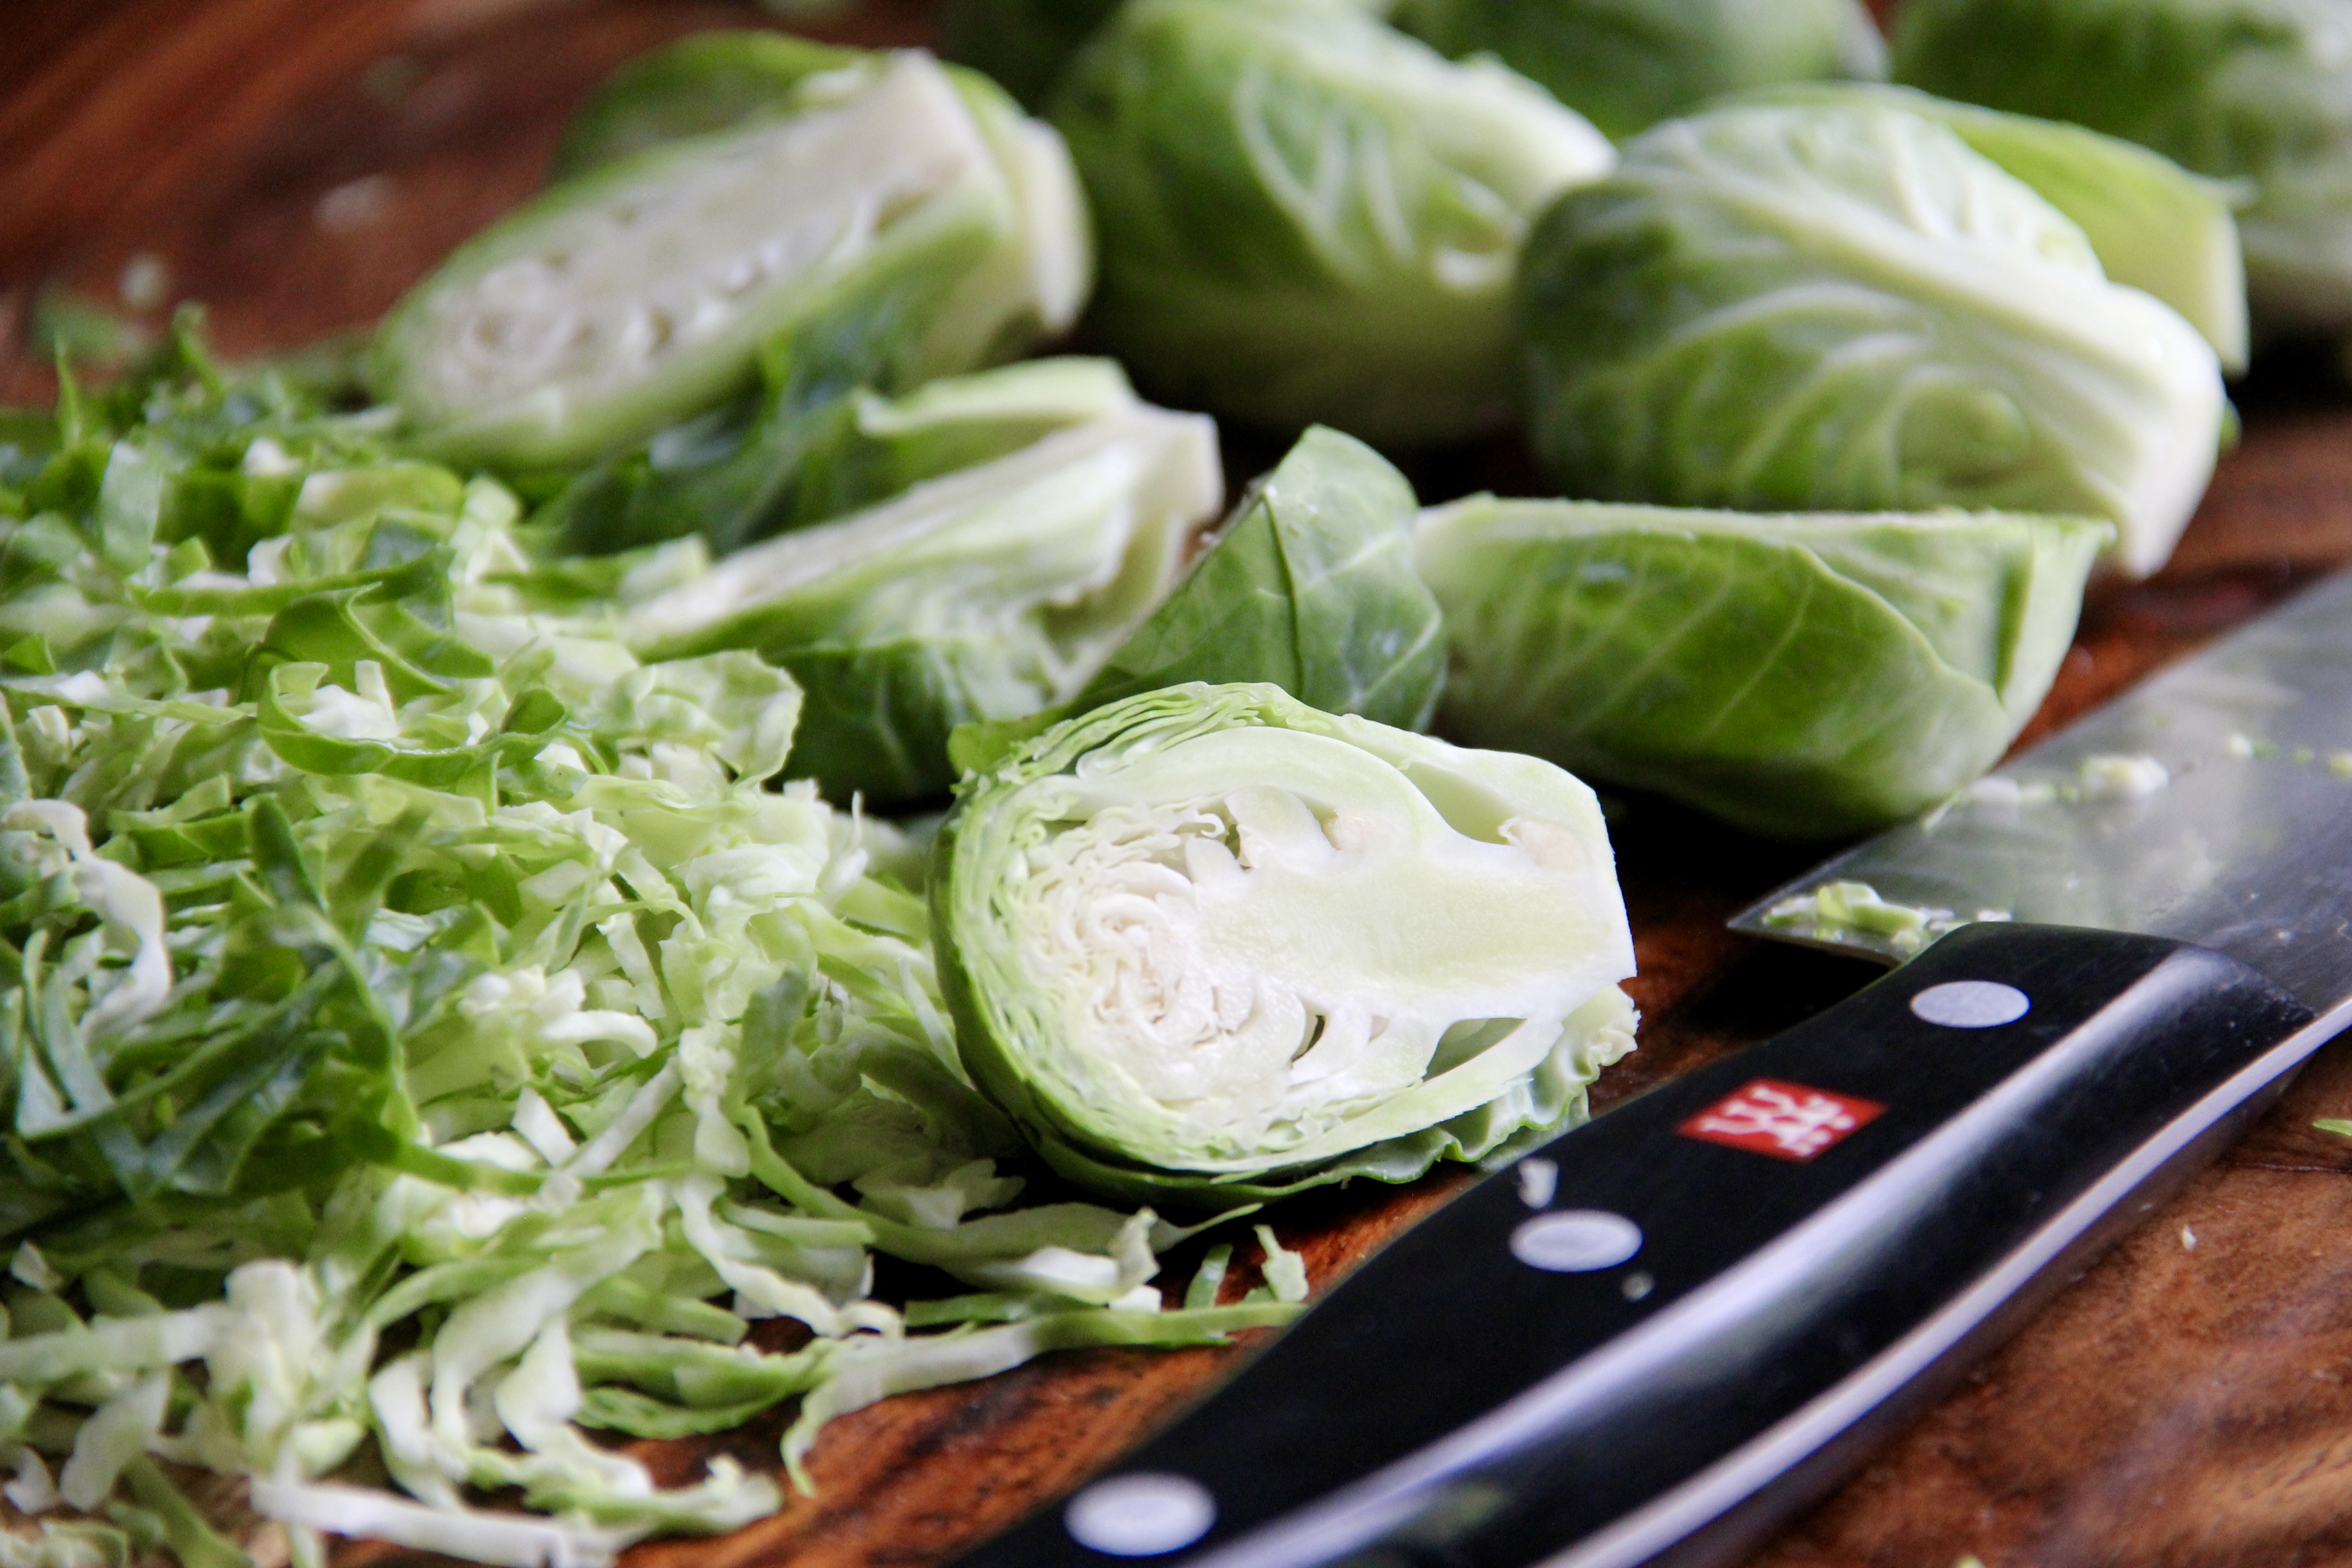 sliced and cut brussels sprouts on a wooden cutting board